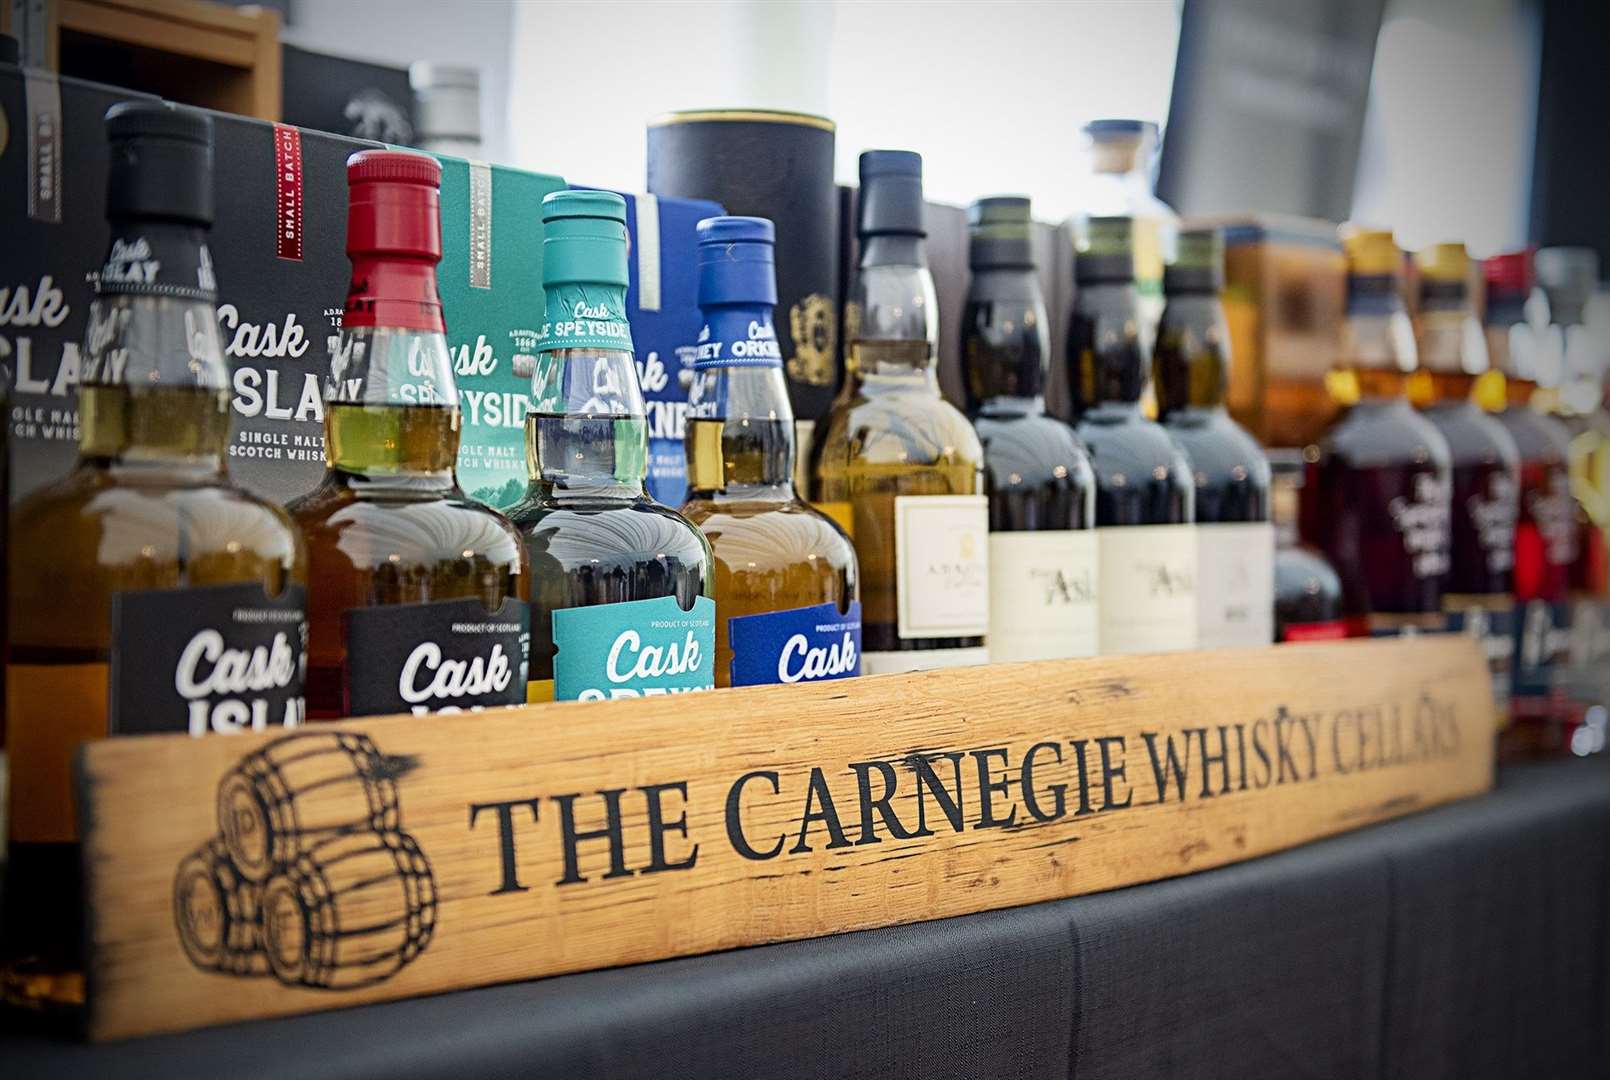 The Carnegie Whisky Cellars is among a number of businesses in Dornoch taking part in the whisky festival. Picture: Dornoch Whisky Festival.